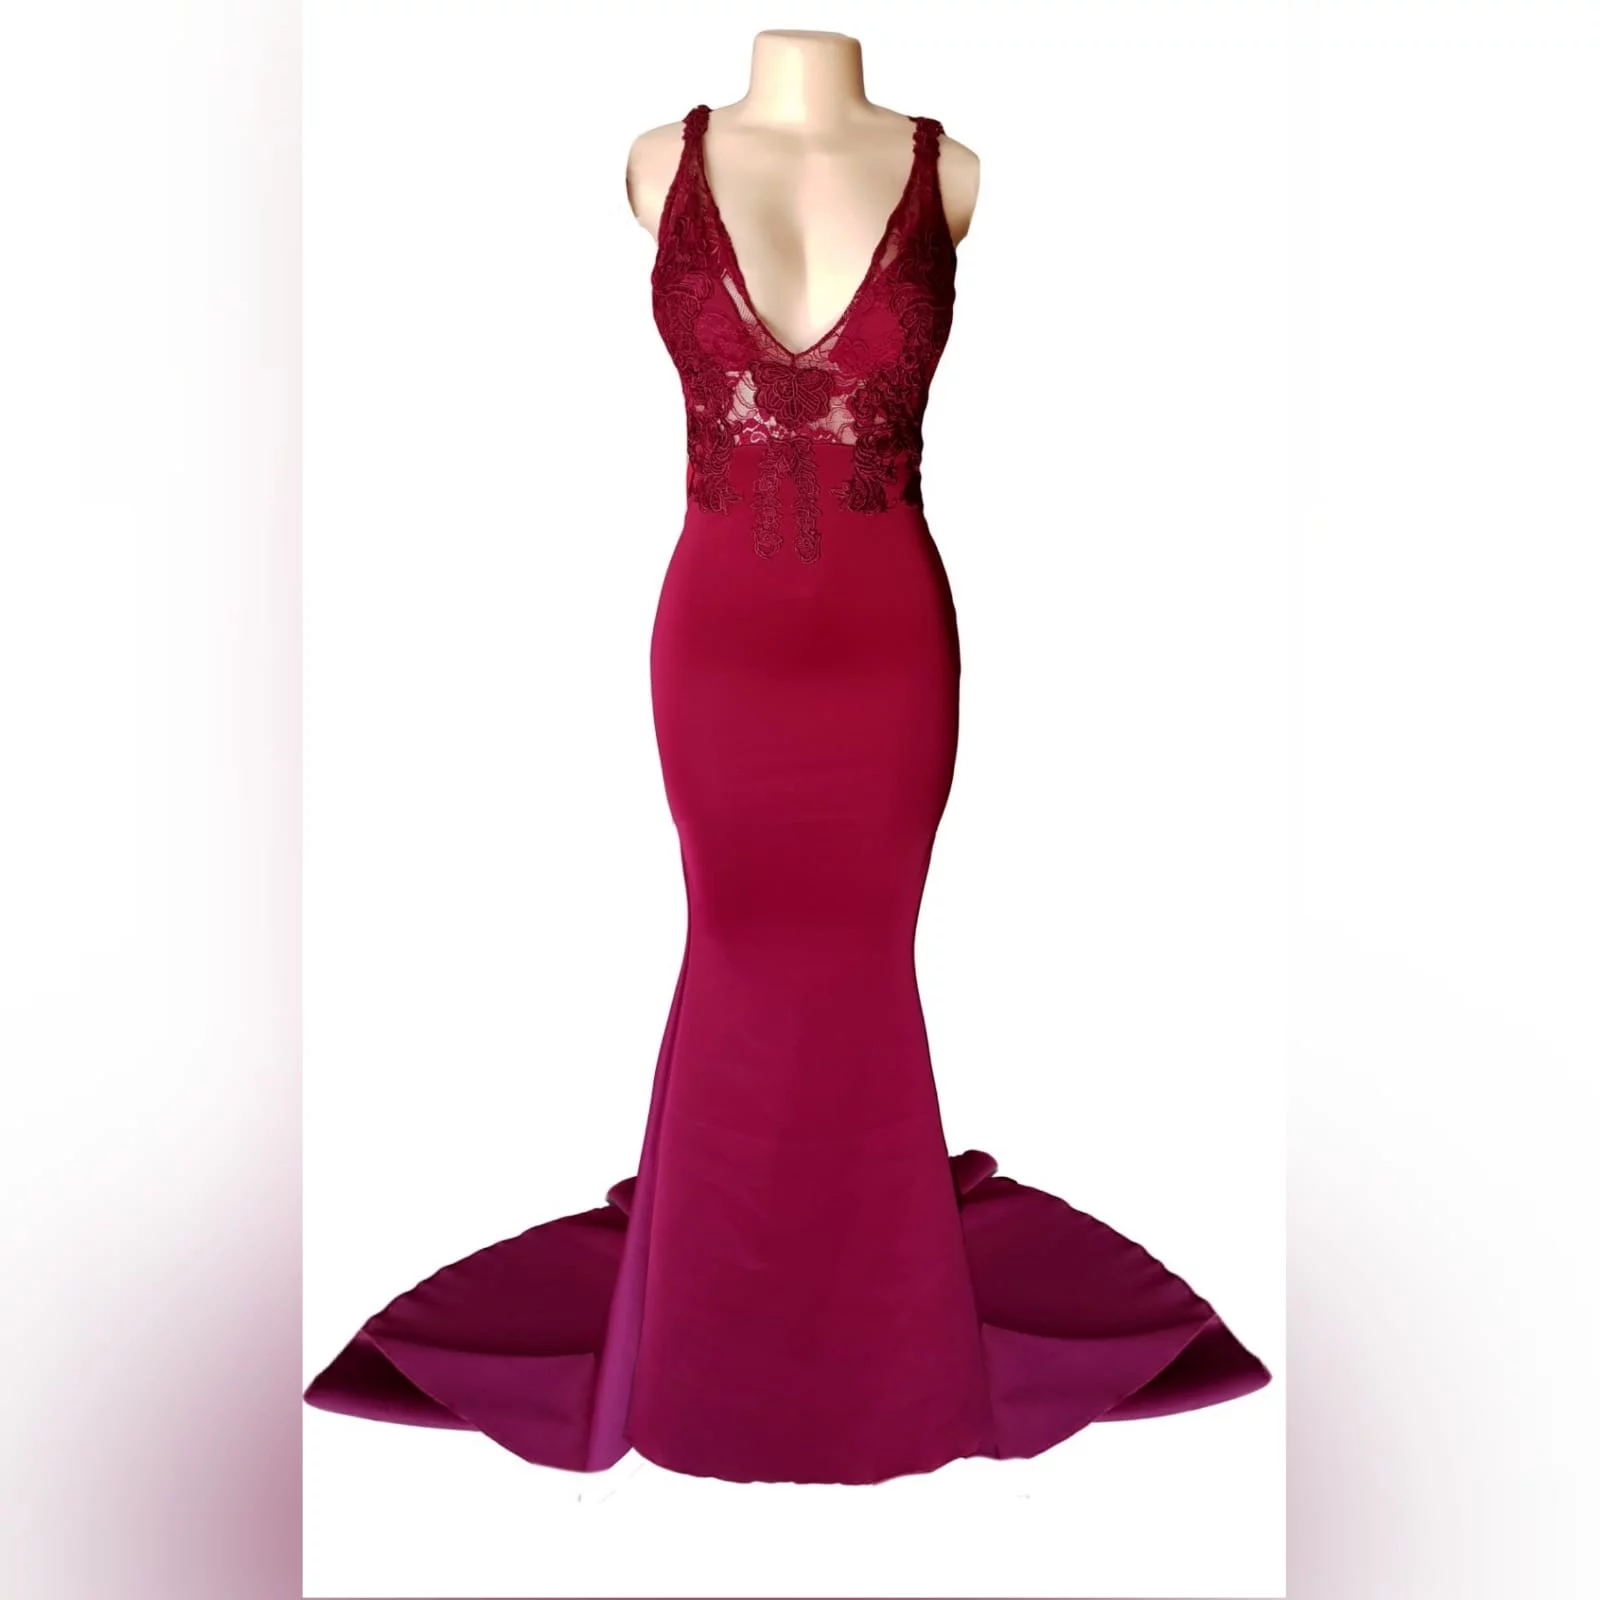 Burgundy soft mermaid sexy elegant matric dance dress 5 burgundy soft mermaid sexy elegant matric dance dress. With an illusion lace bodice with deep v neckline, low open v back with strap detail, with a train